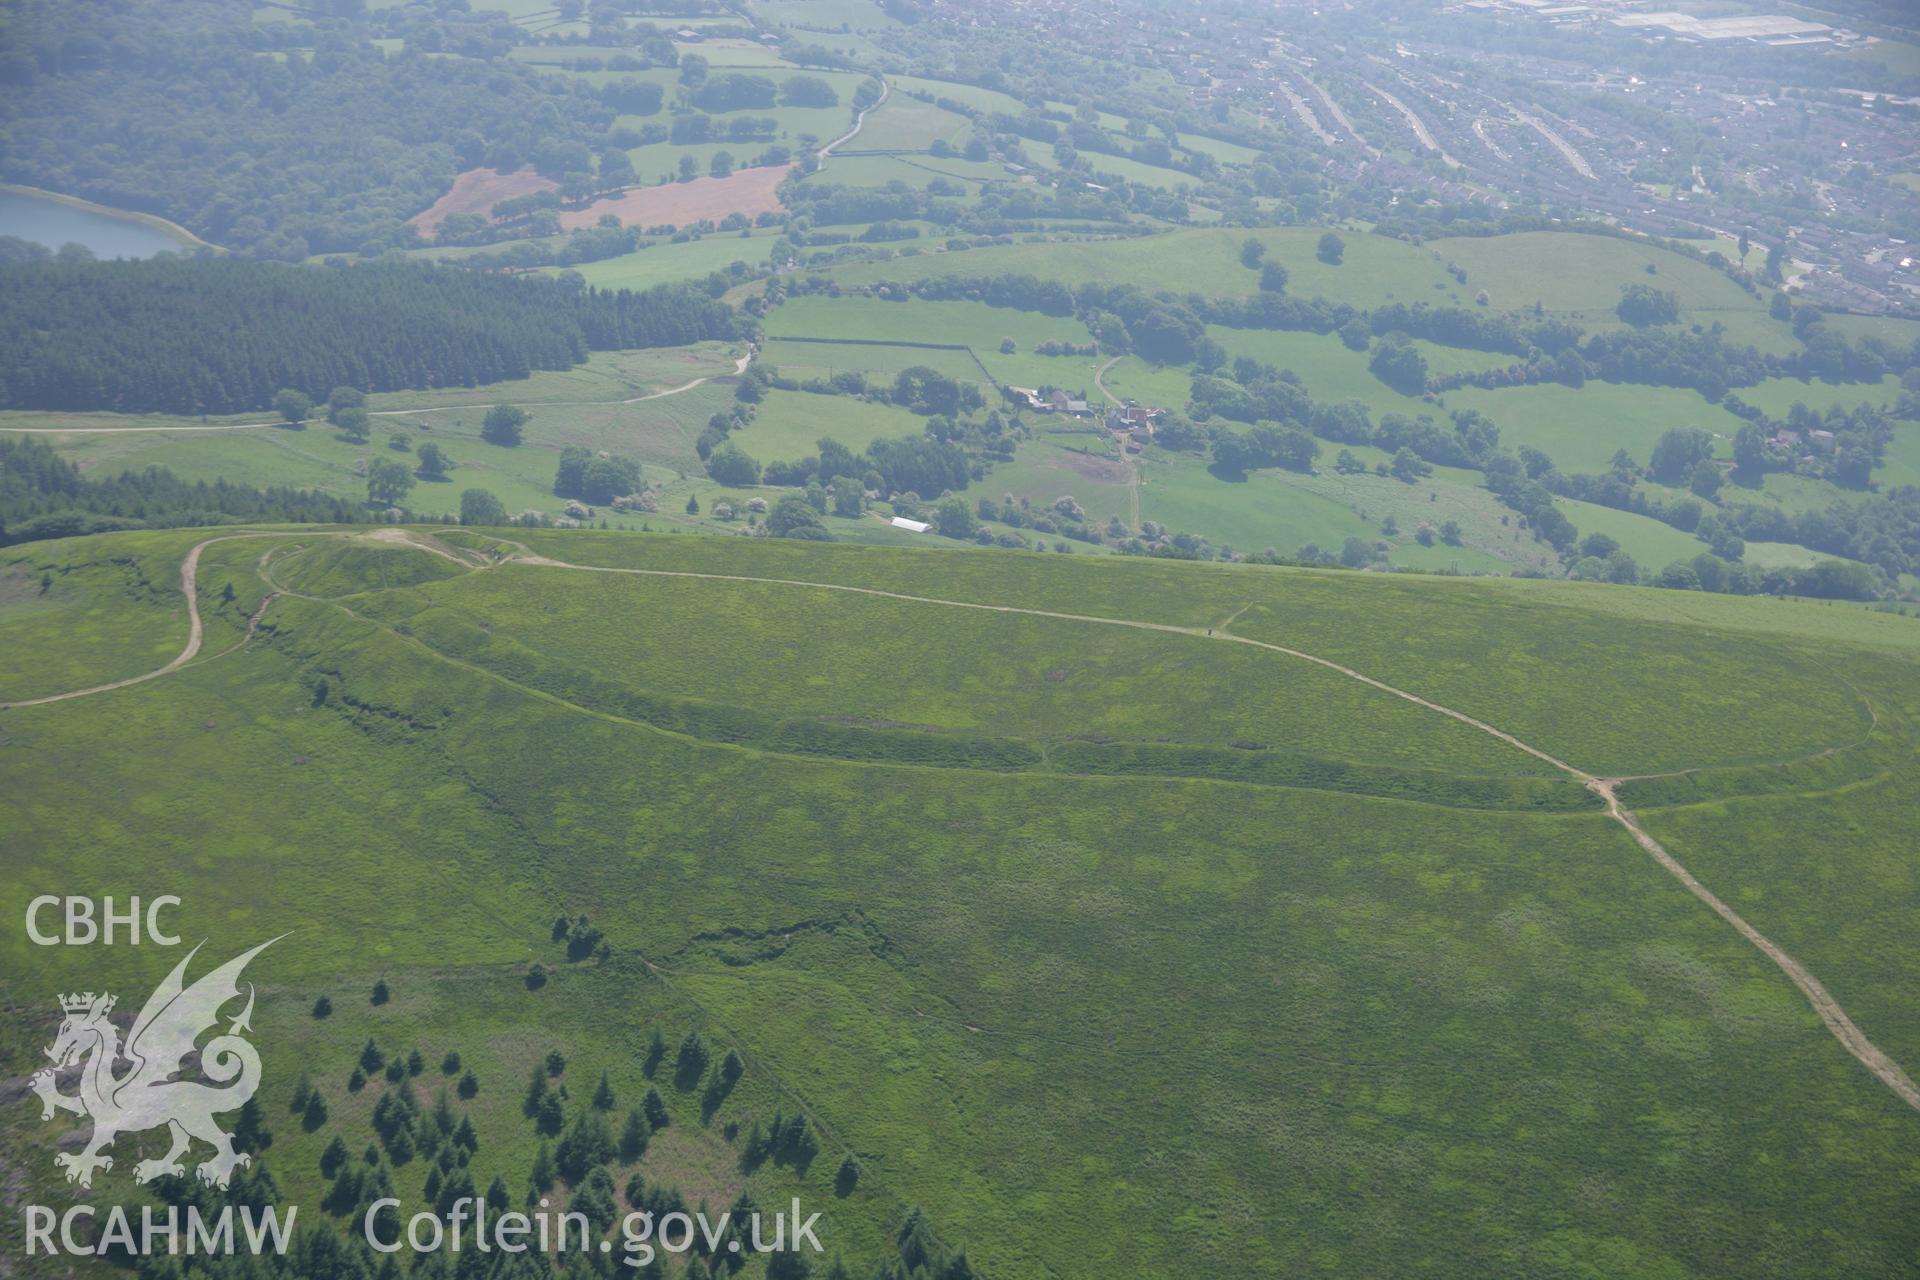 RCAHMW colour oblique aerial photograph of Twmbarlwm Castle and possible hillfort from the north. Taken on 09 June 2006 by Toby Driver.